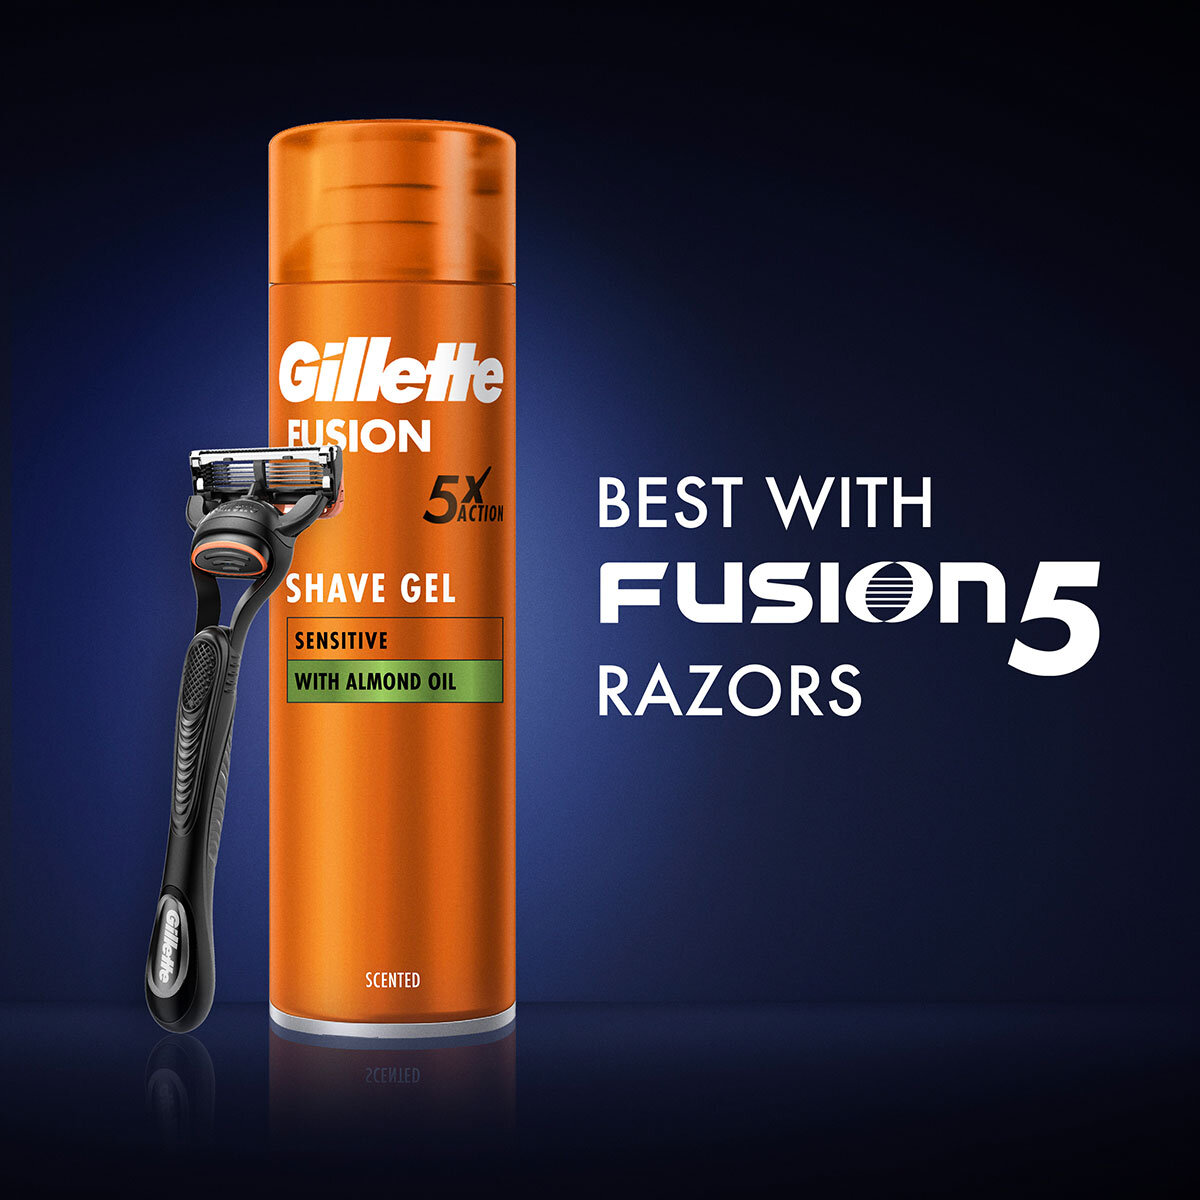 Best With Fusion5 Razors